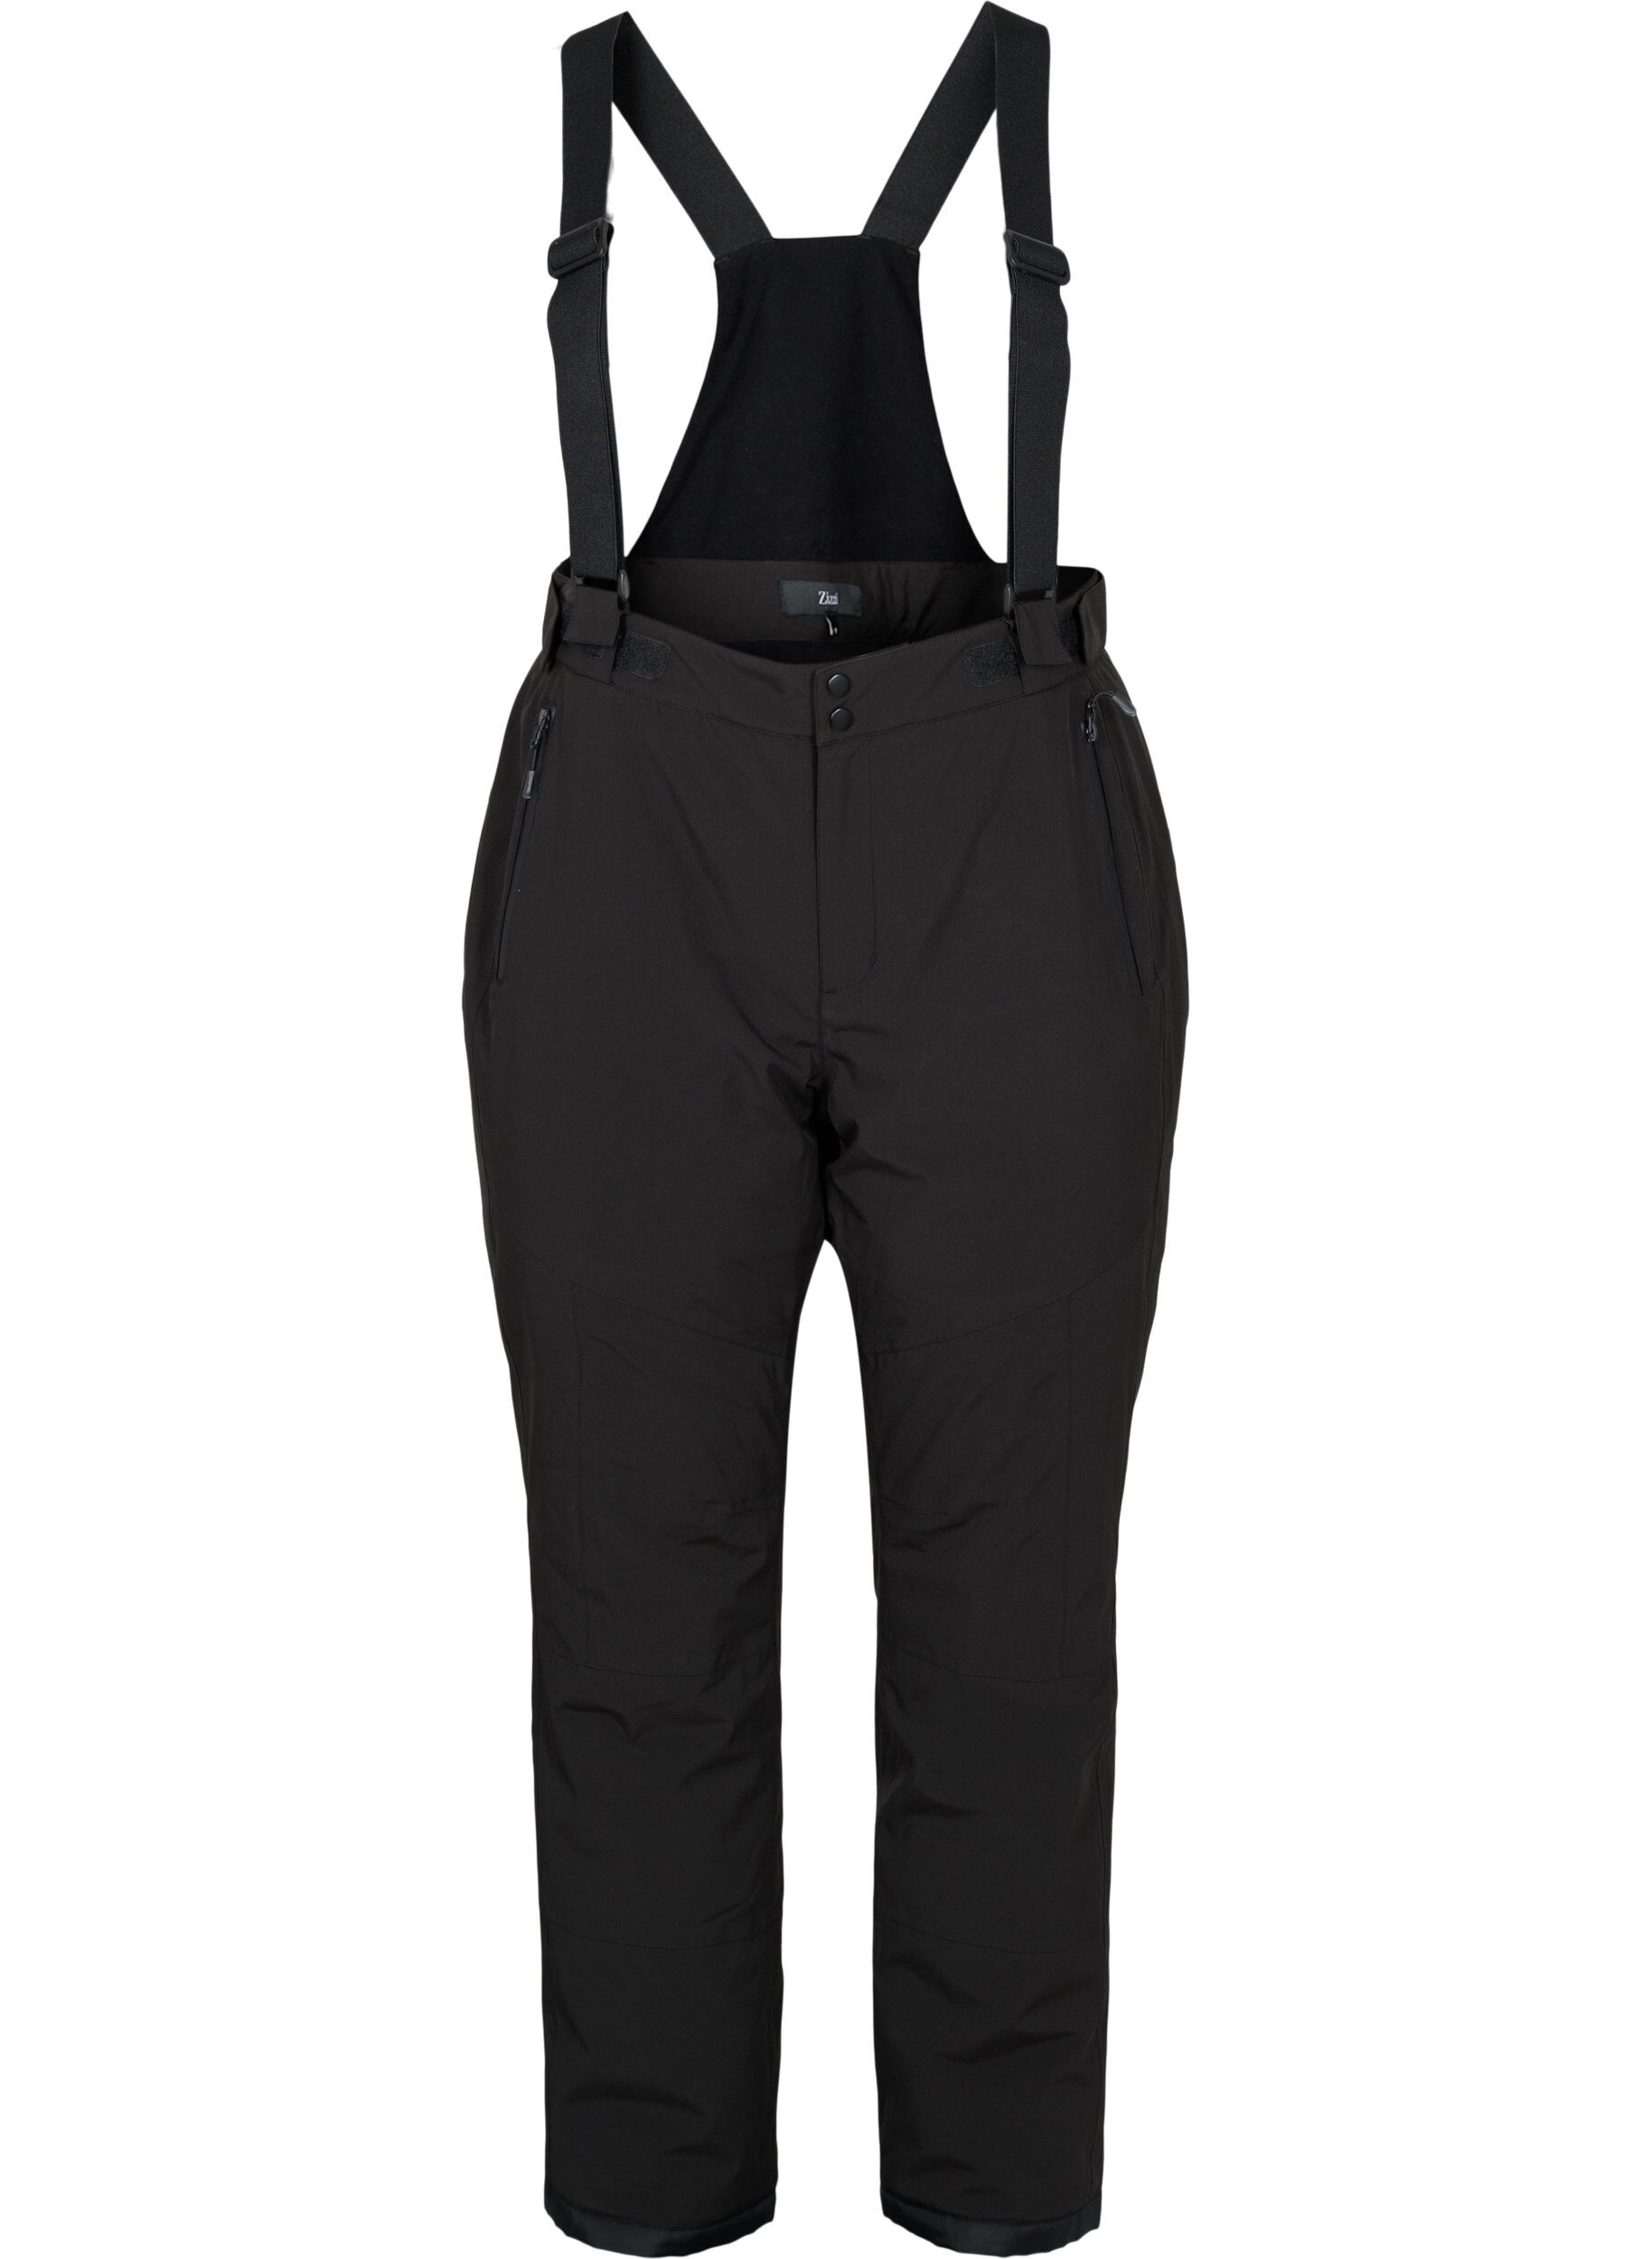 Microchevron linen trousers with darts and leather braces  EMPORIO ARMANI  Woman